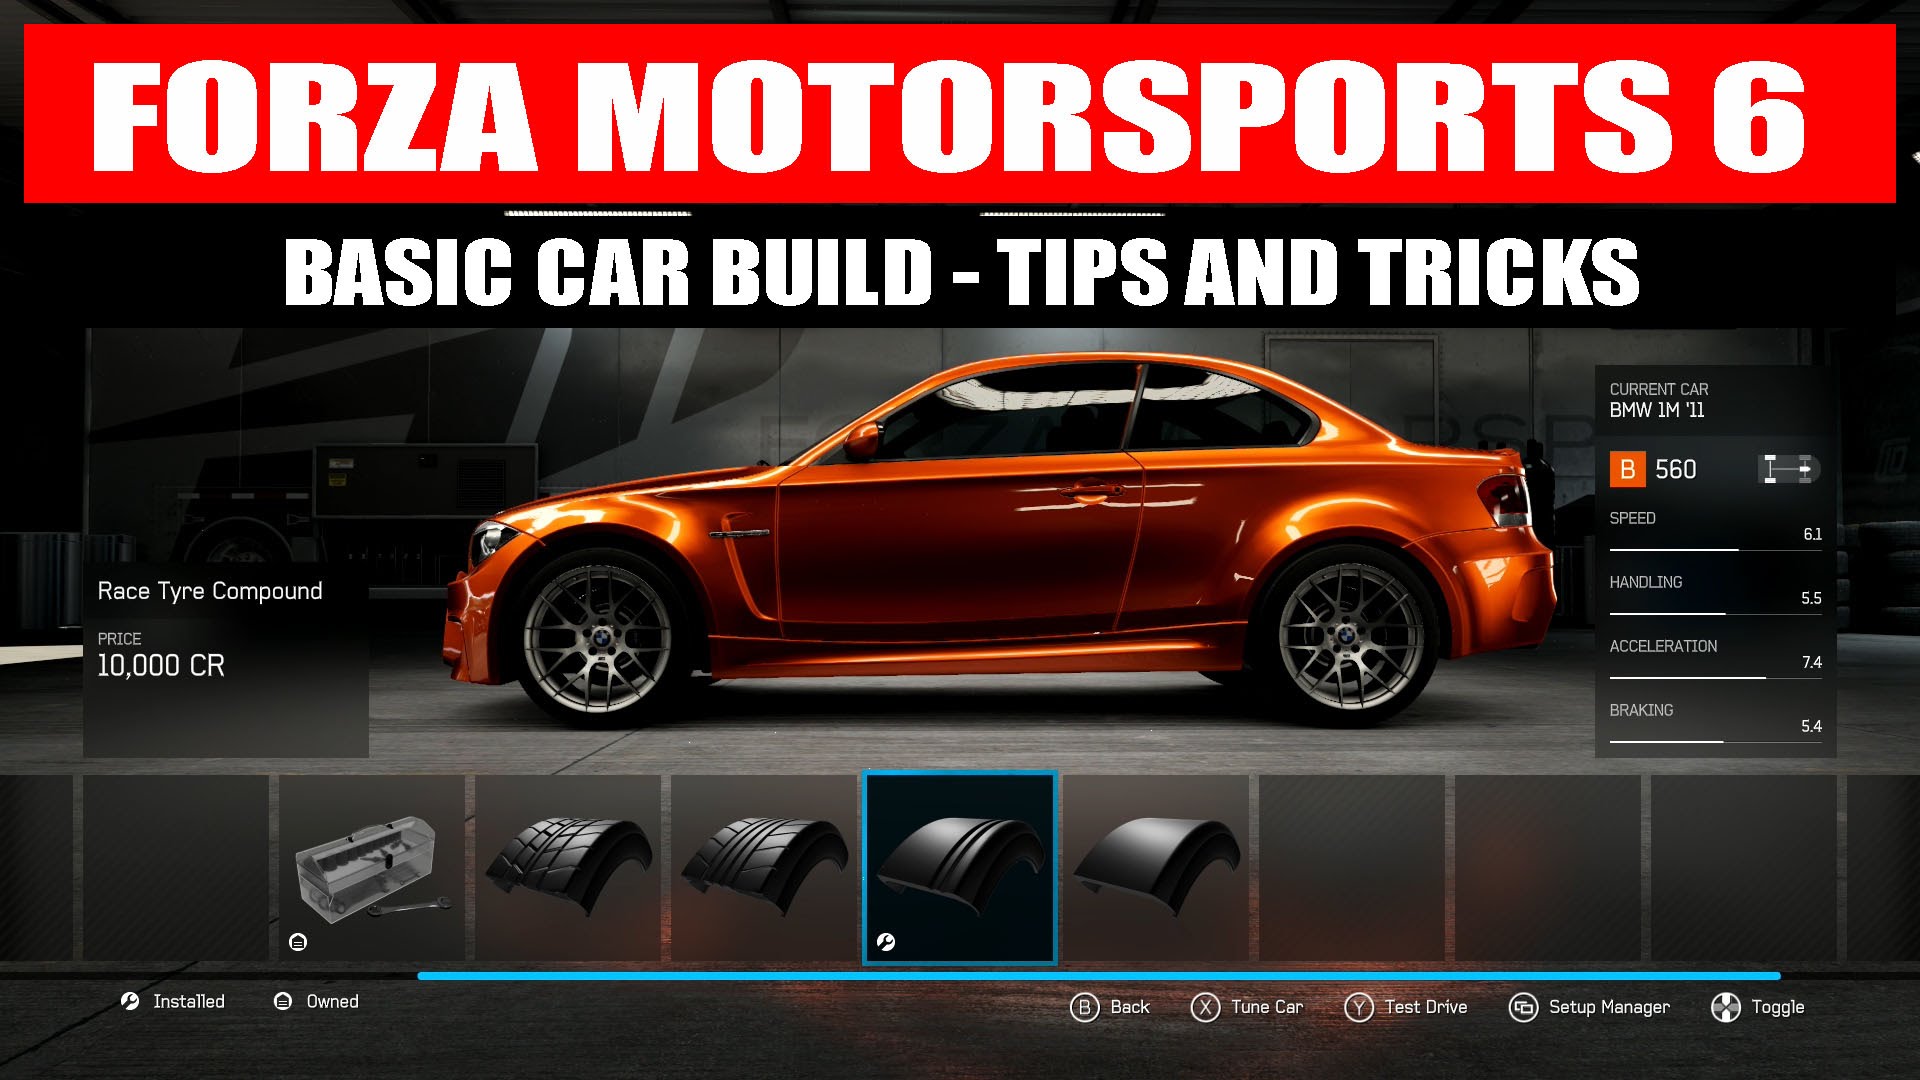 Forza motorsports 6 - Upgrading your car - Tips and Tricks - YouTube